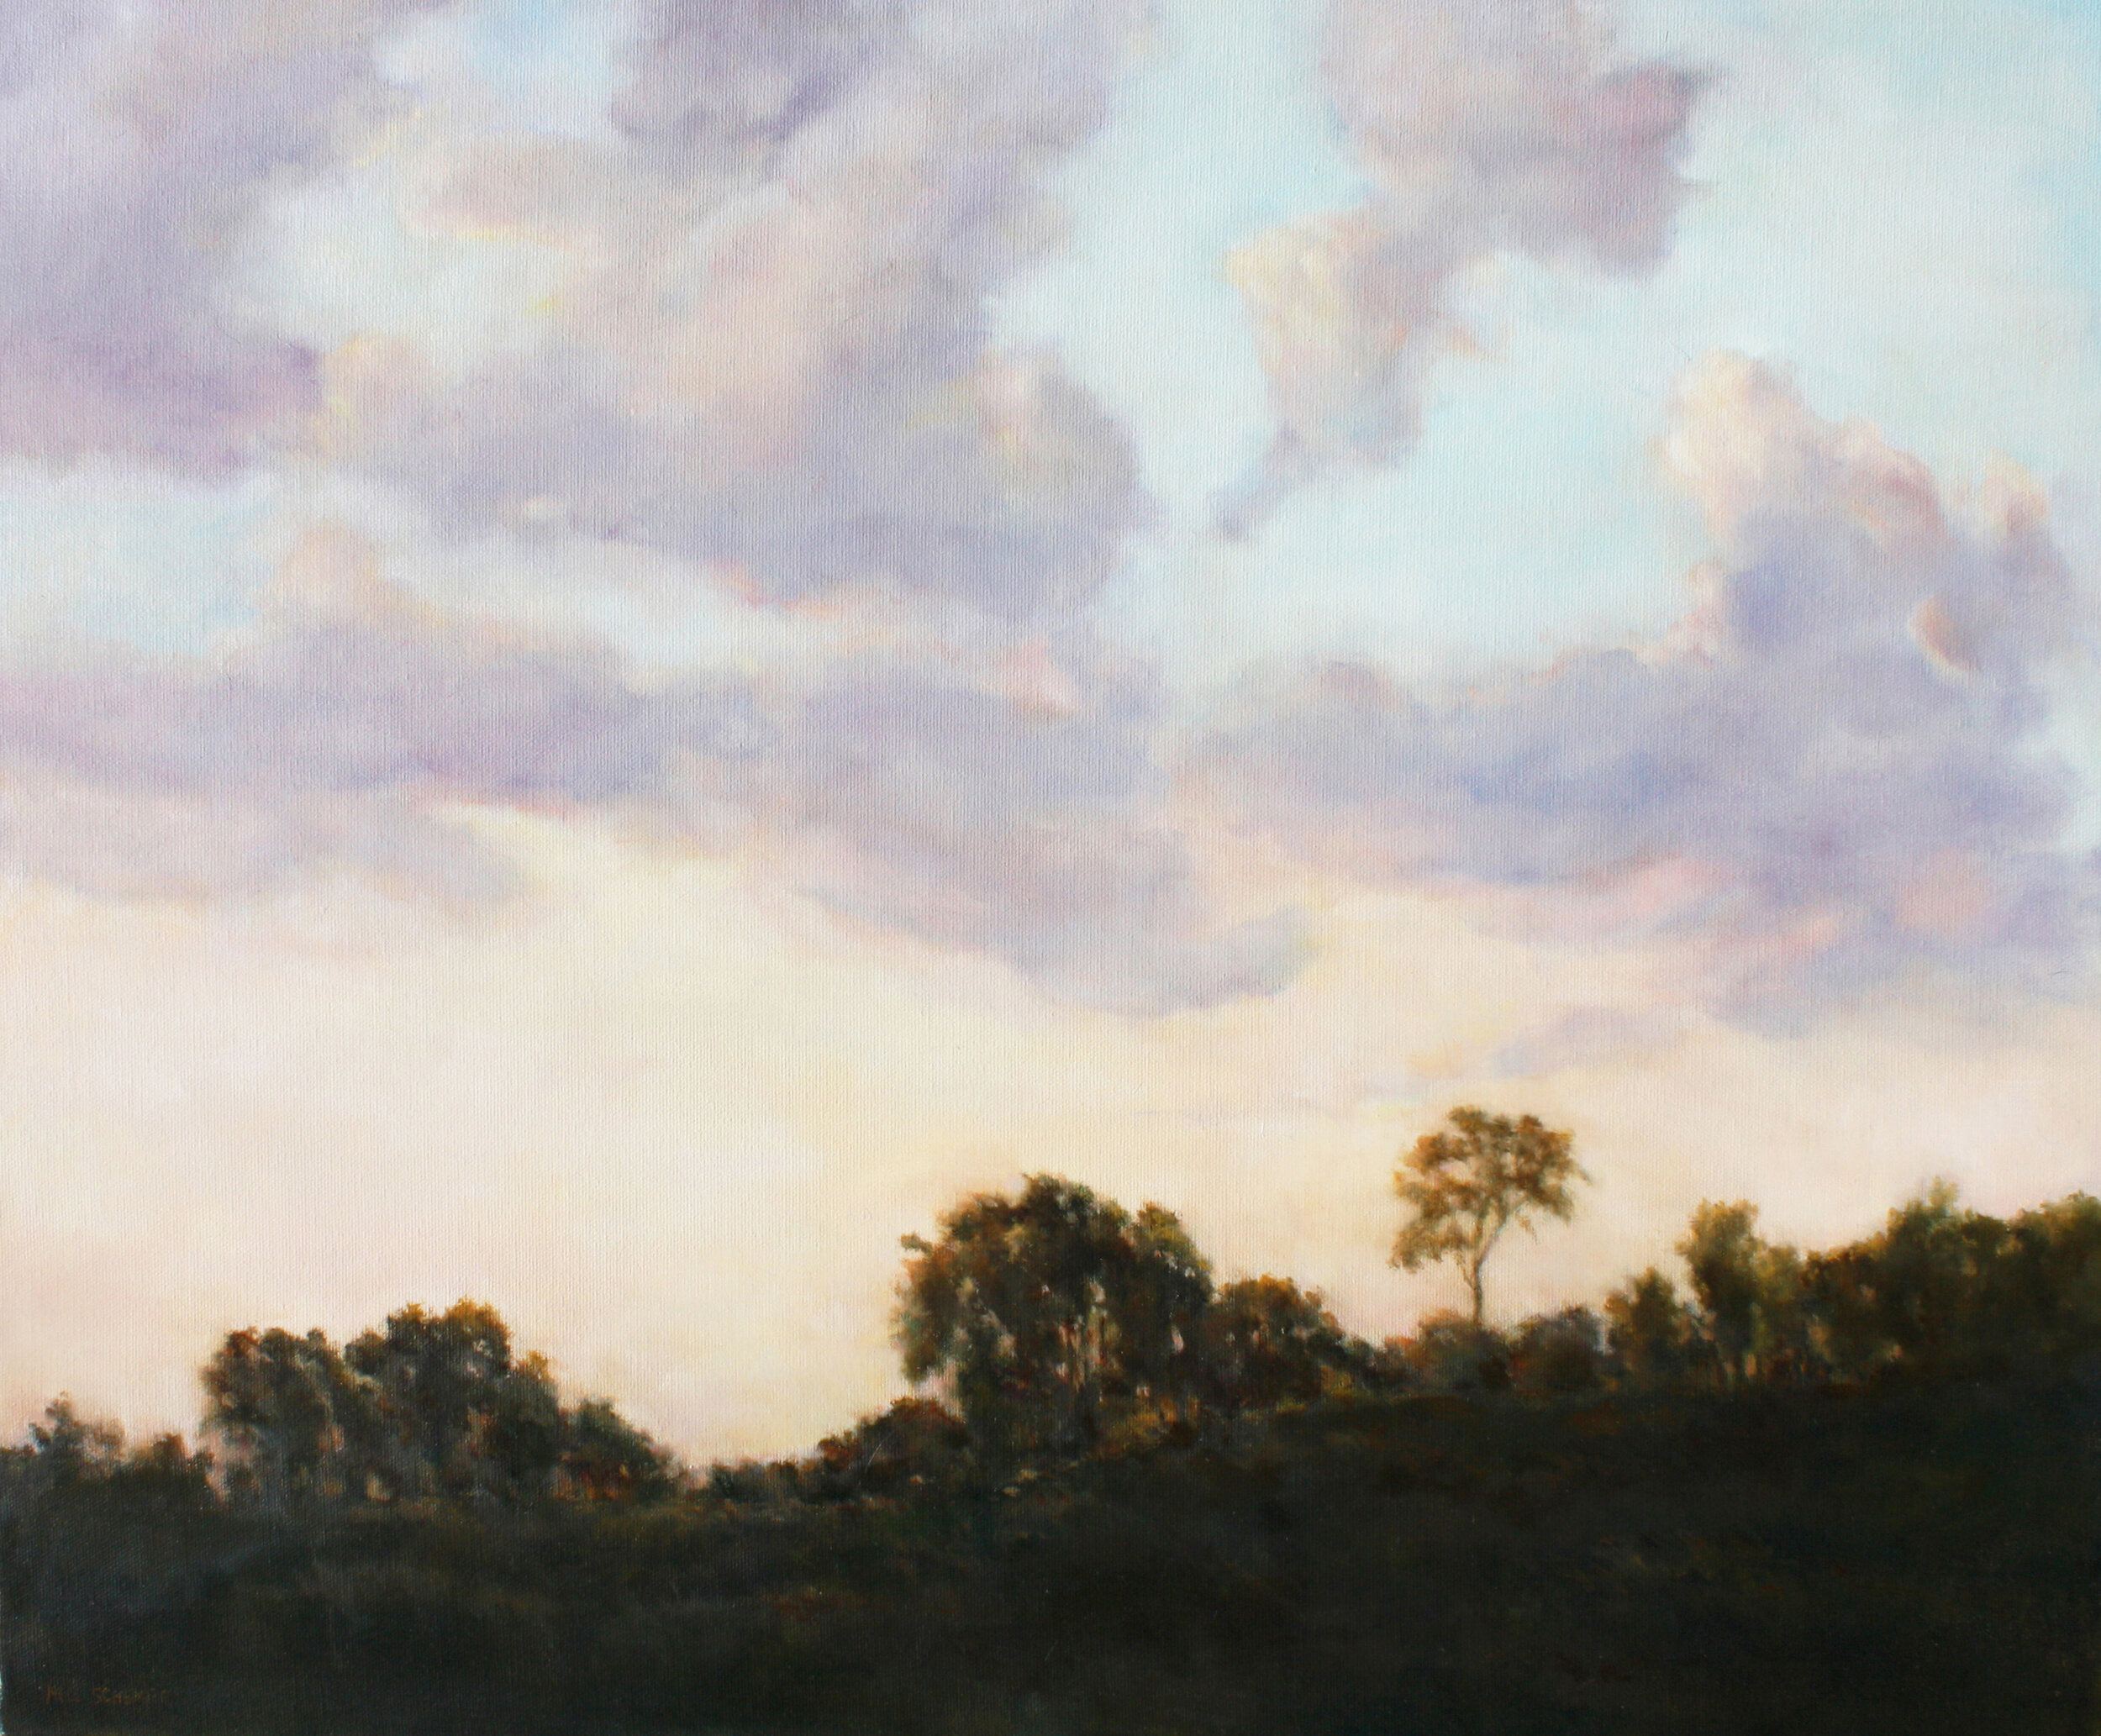  Mary Lou Schempf  Trees Before Twilight,  20” x 24”, oil on canvas  (available)                                                                                                                 